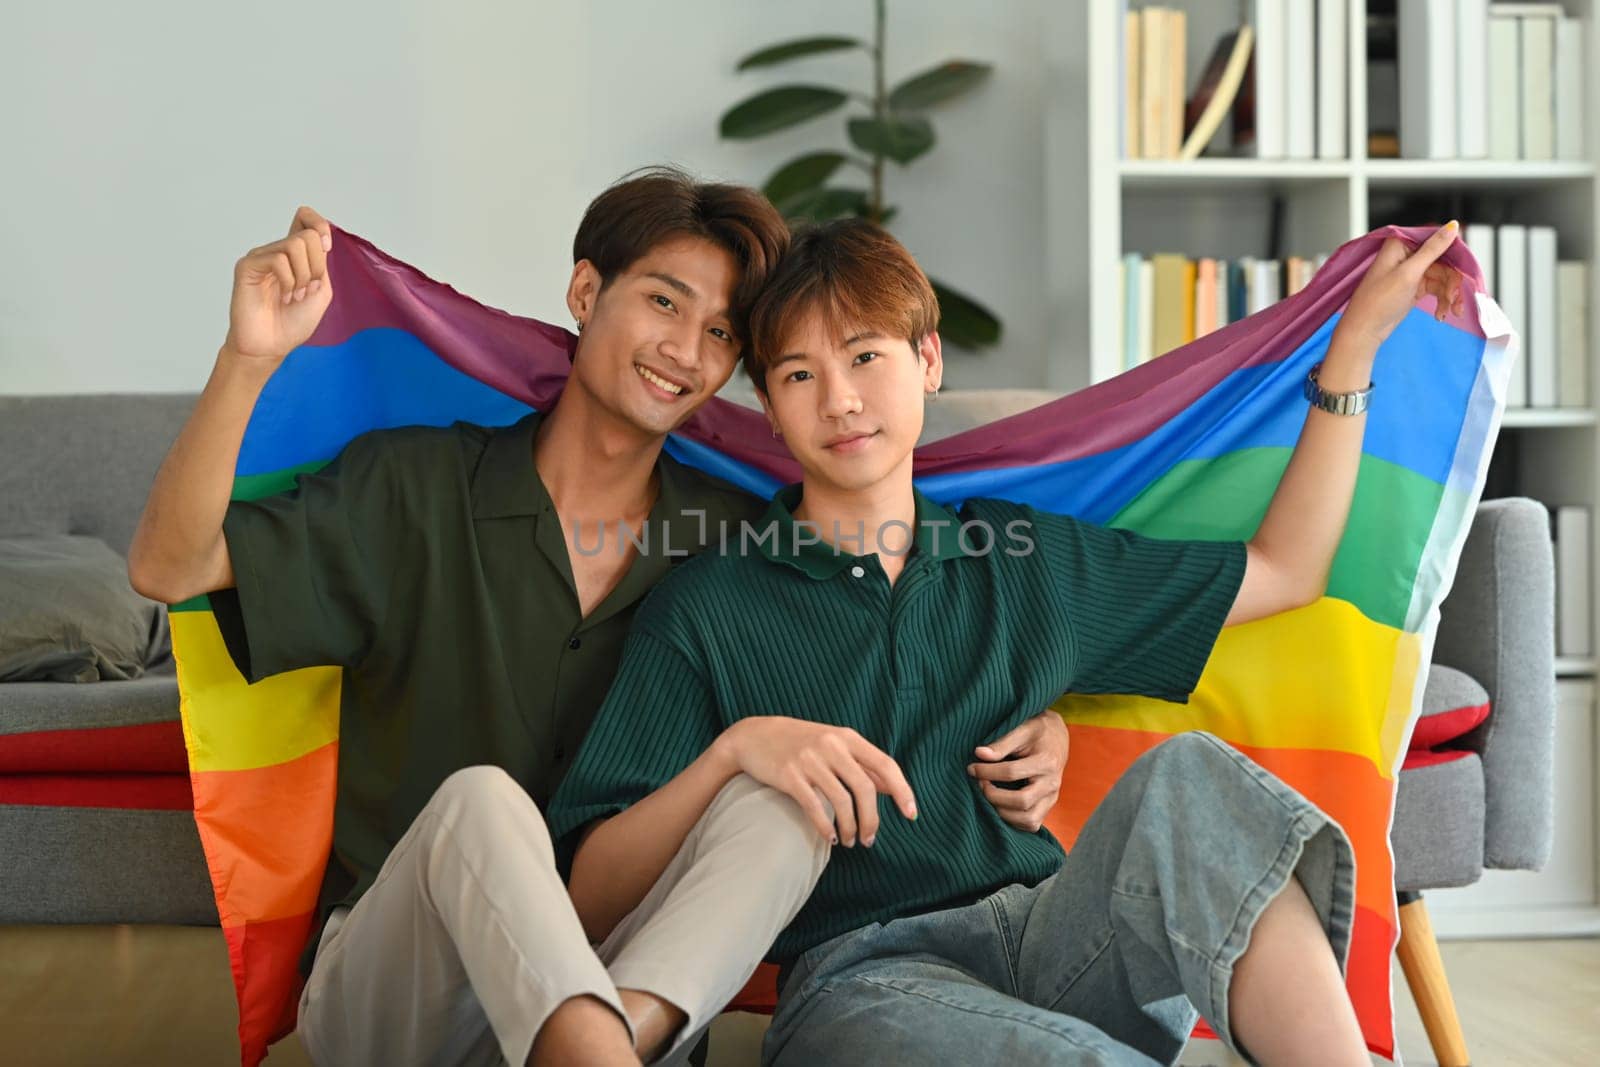 Image of gay couple embracing under LGBT pride flag. LGBT, love and human rights concept by prathanchorruangsak